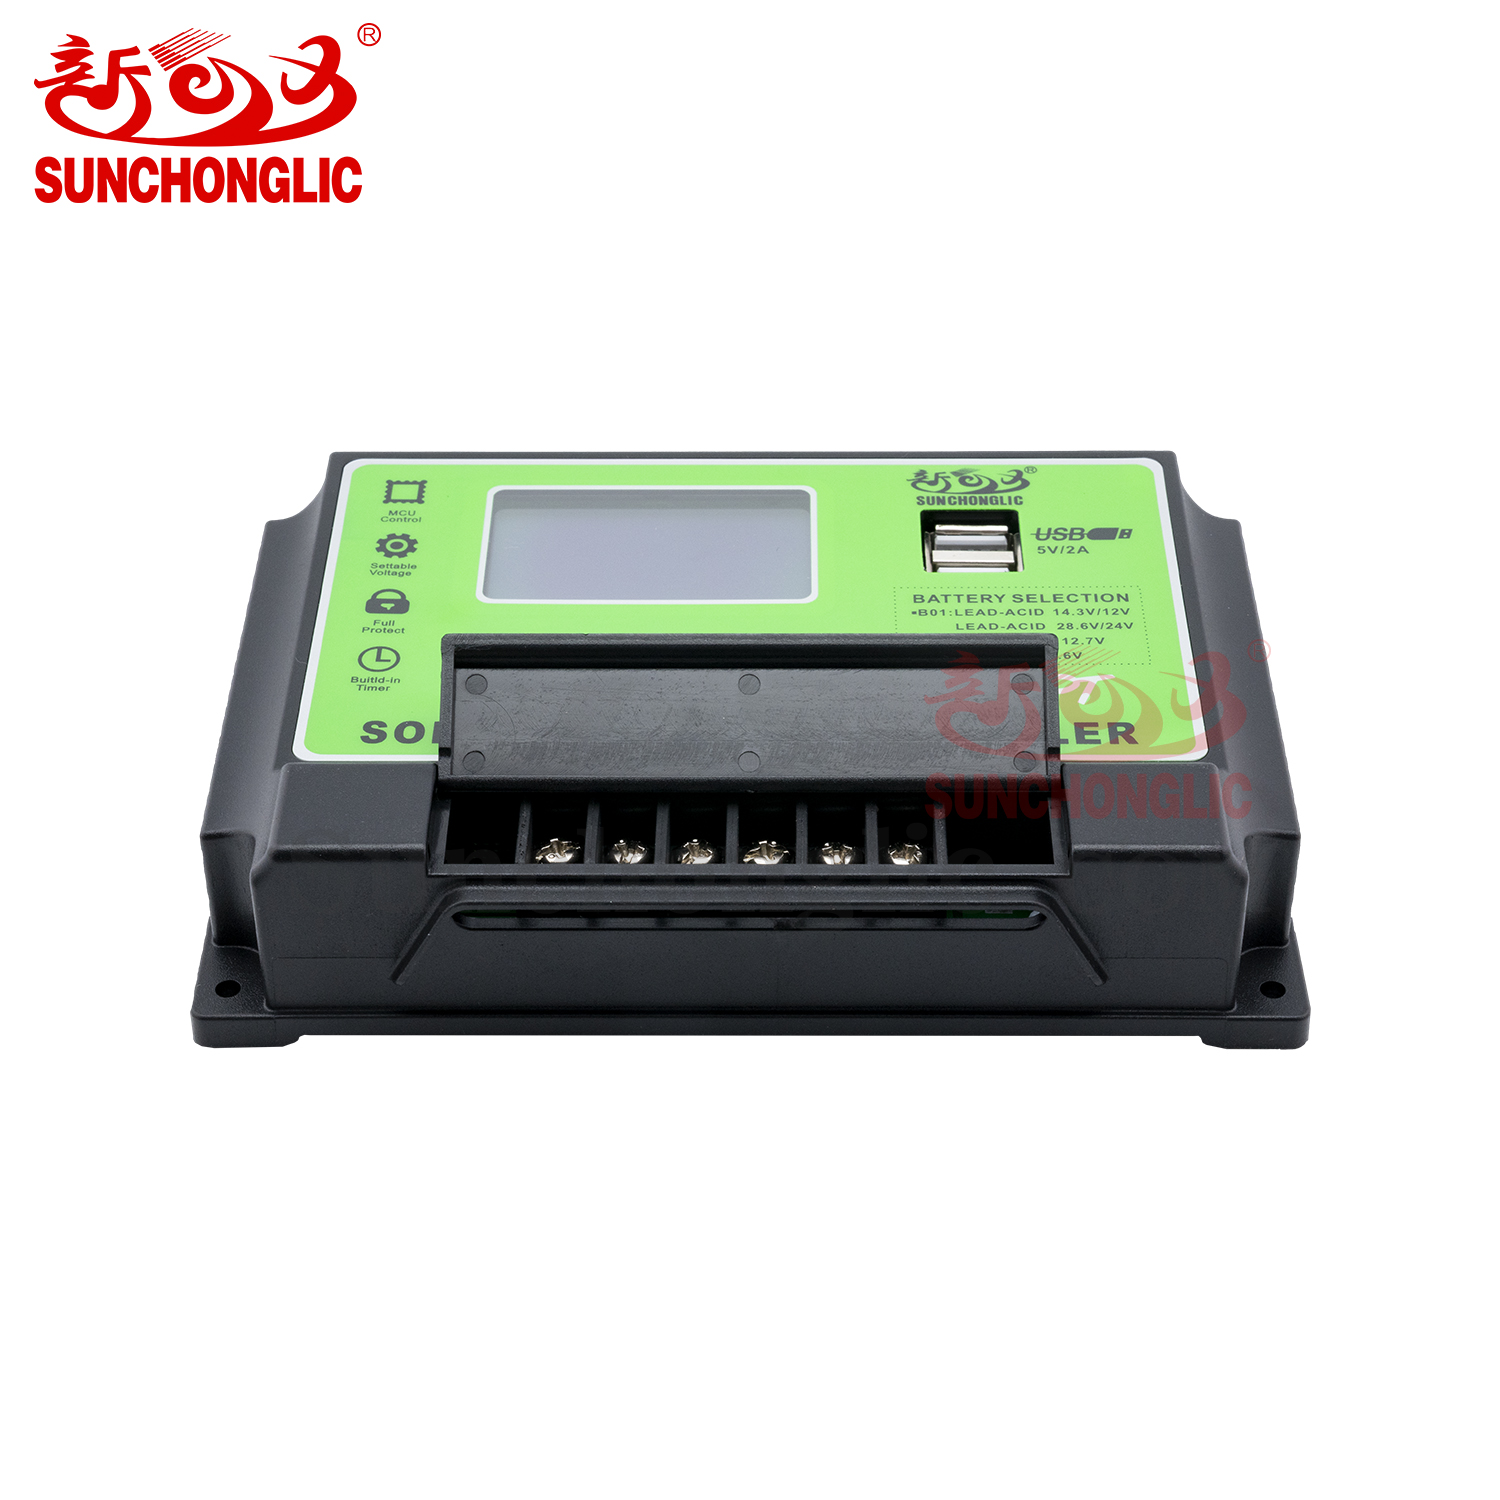 Solar Charge Controller - FT-M1240